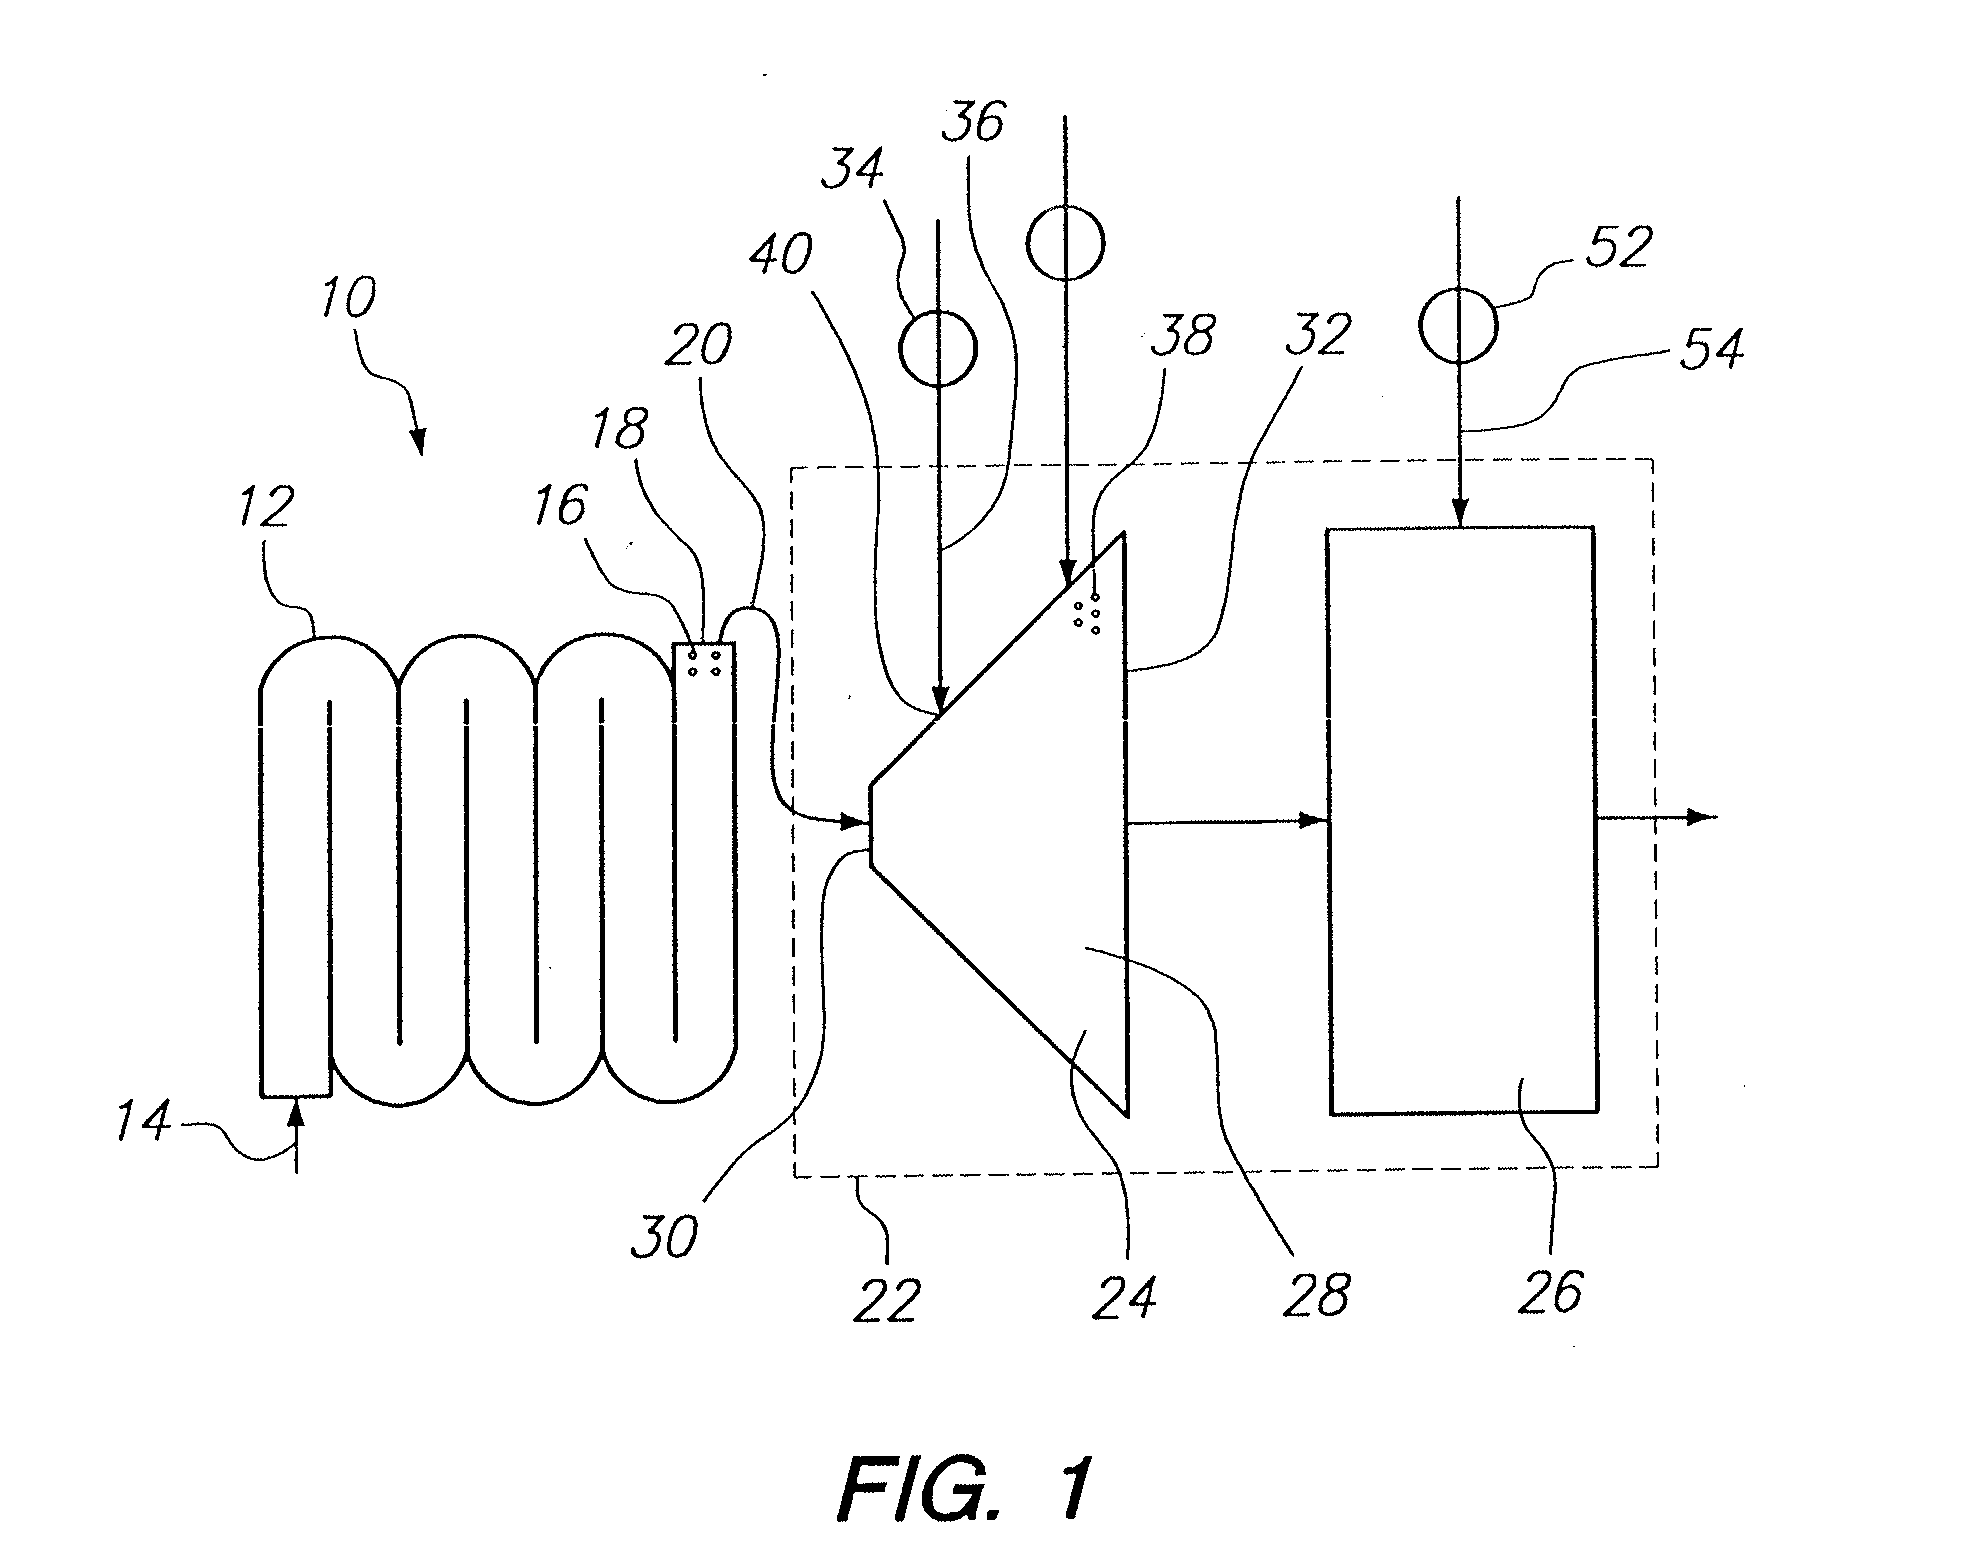 Method and System for Growing Microalgae in an Expanding Plug Flow Reactor